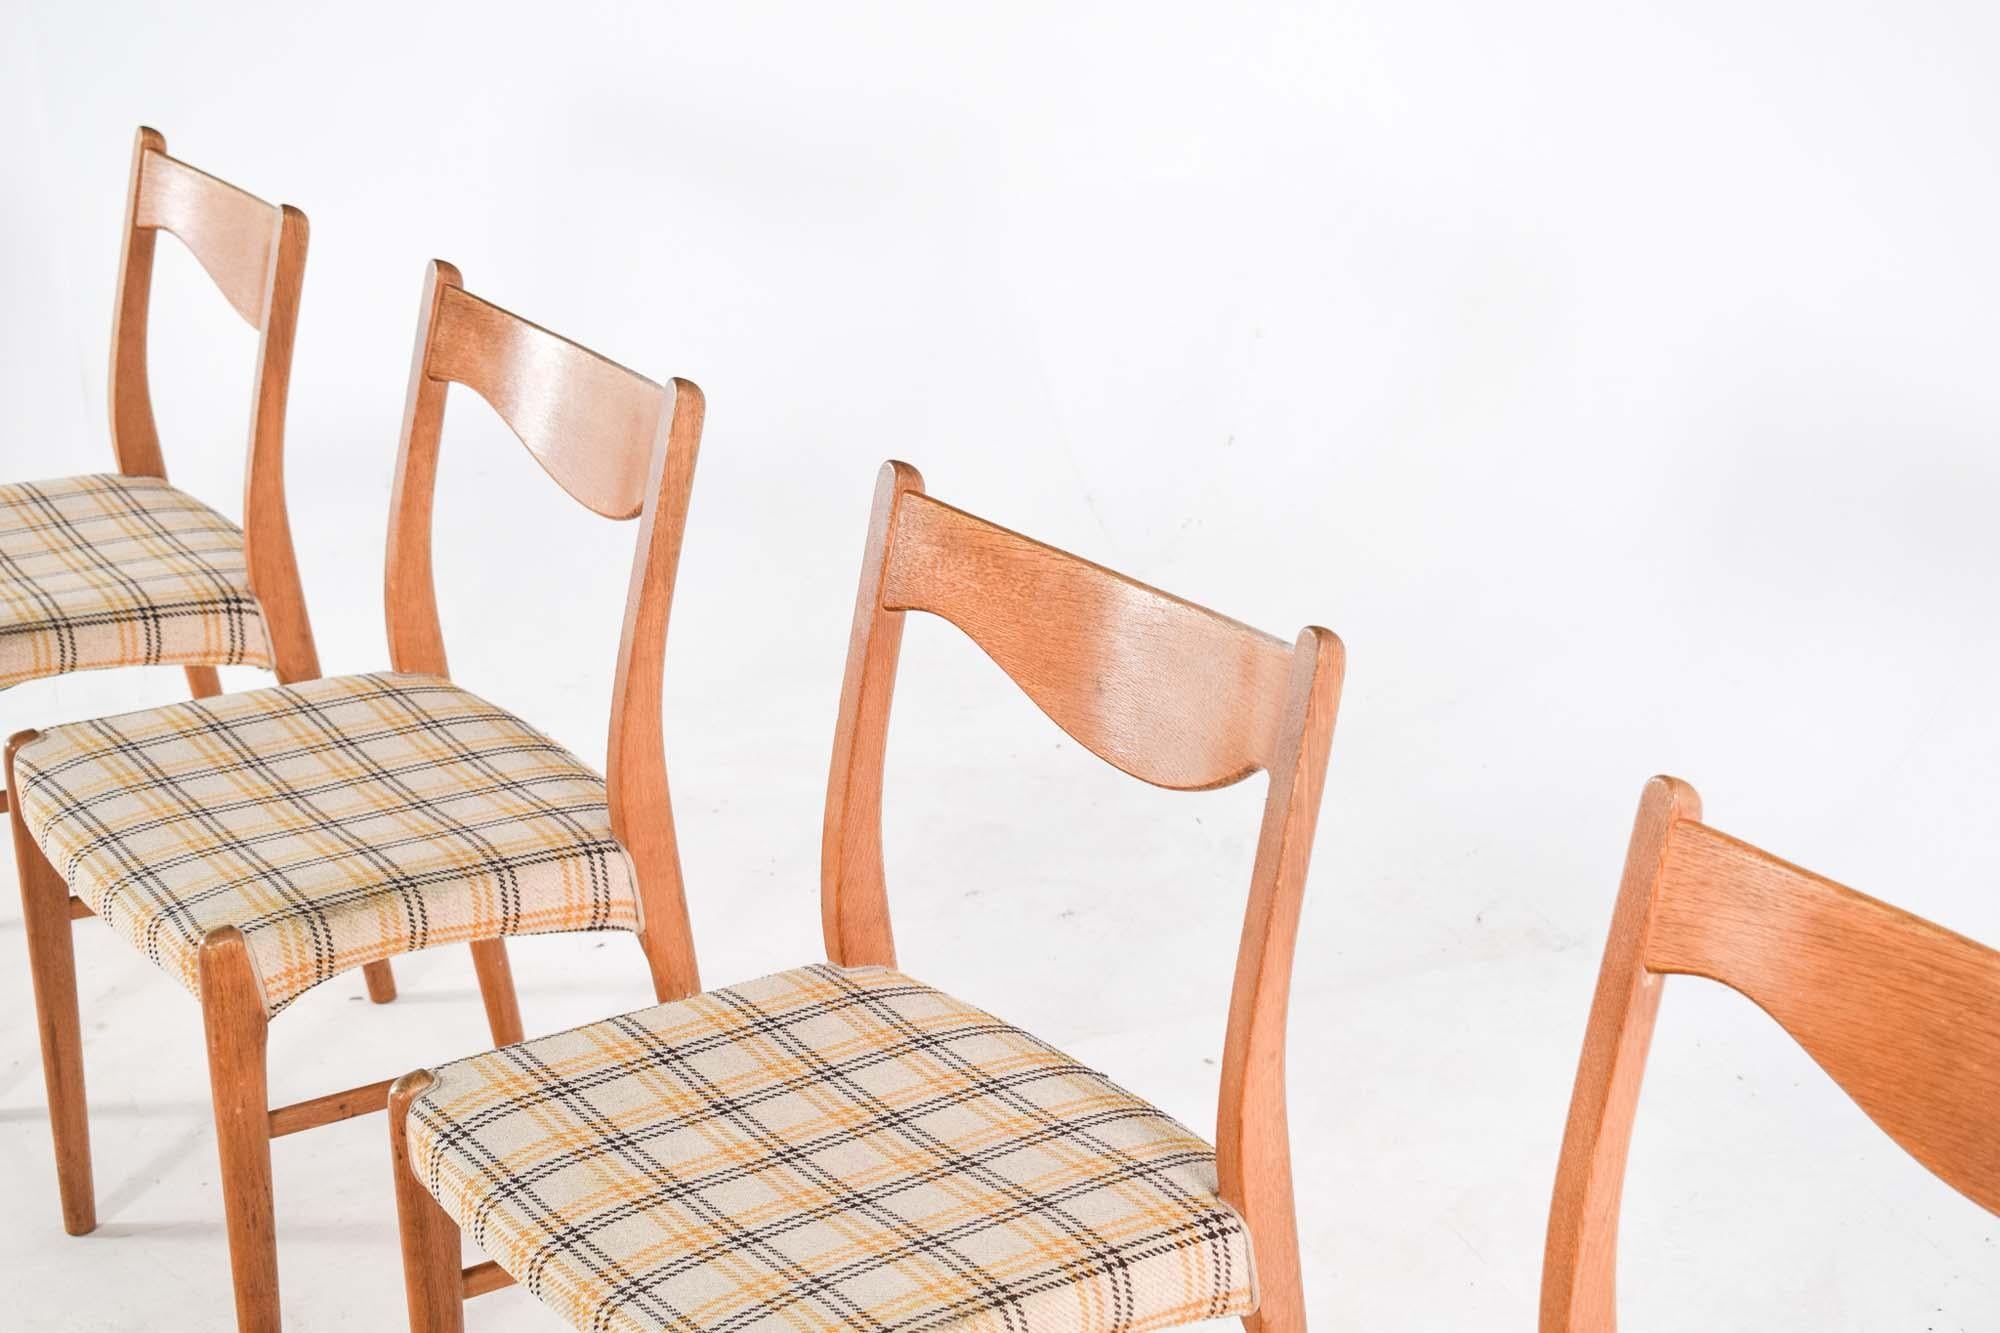 This image presents a quartet of Arne Wahl Iversen Model GS60 chairs, crafted in the 1960s and emanating the timeless allure of Danish design. Manufactured by Glyngore Stolefabrik, these chairs are exemplary pieces of Mid-Century Modern furniture,